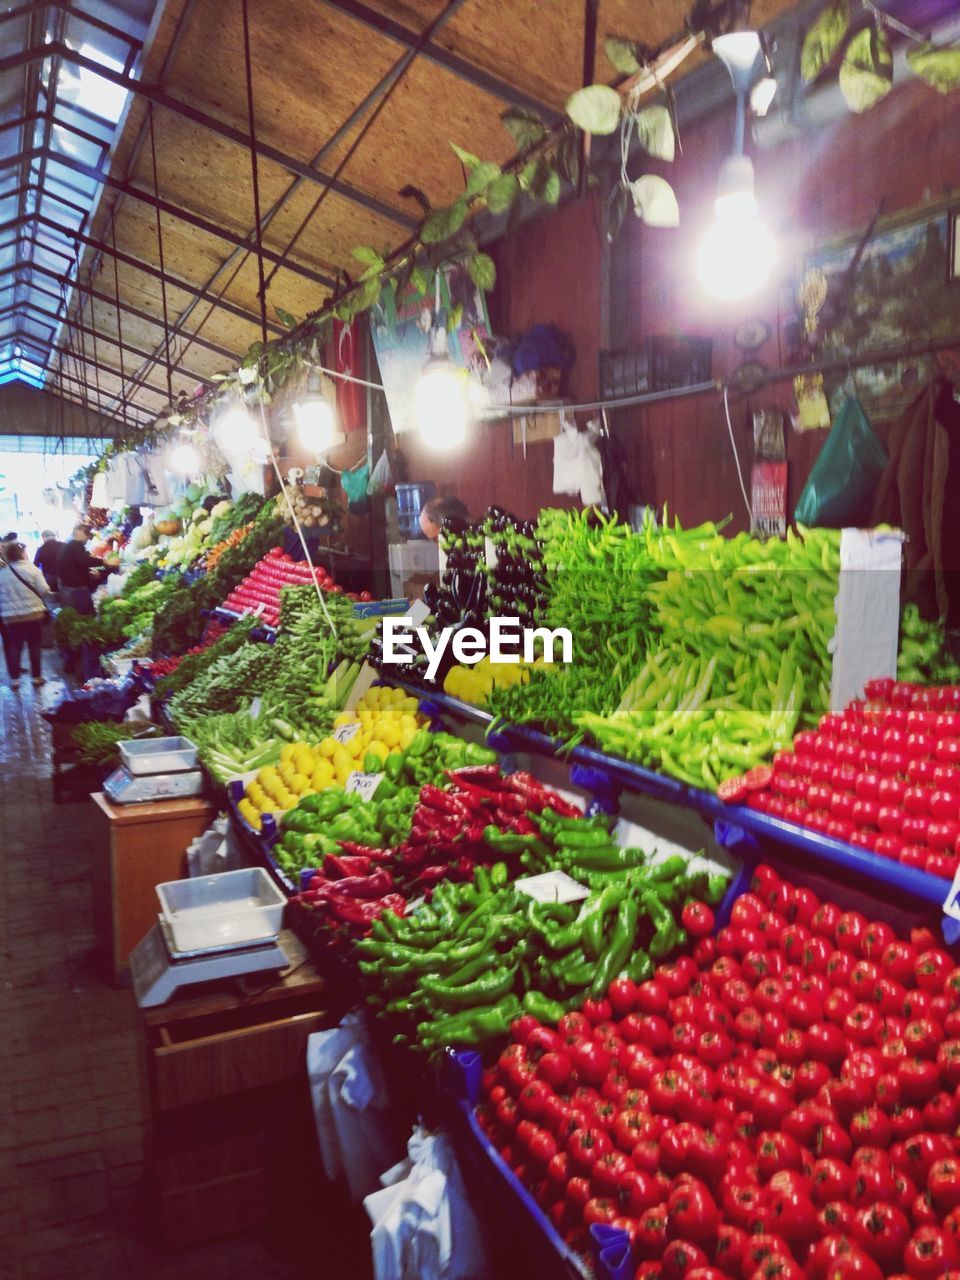 Fruits and vegetables in market stall